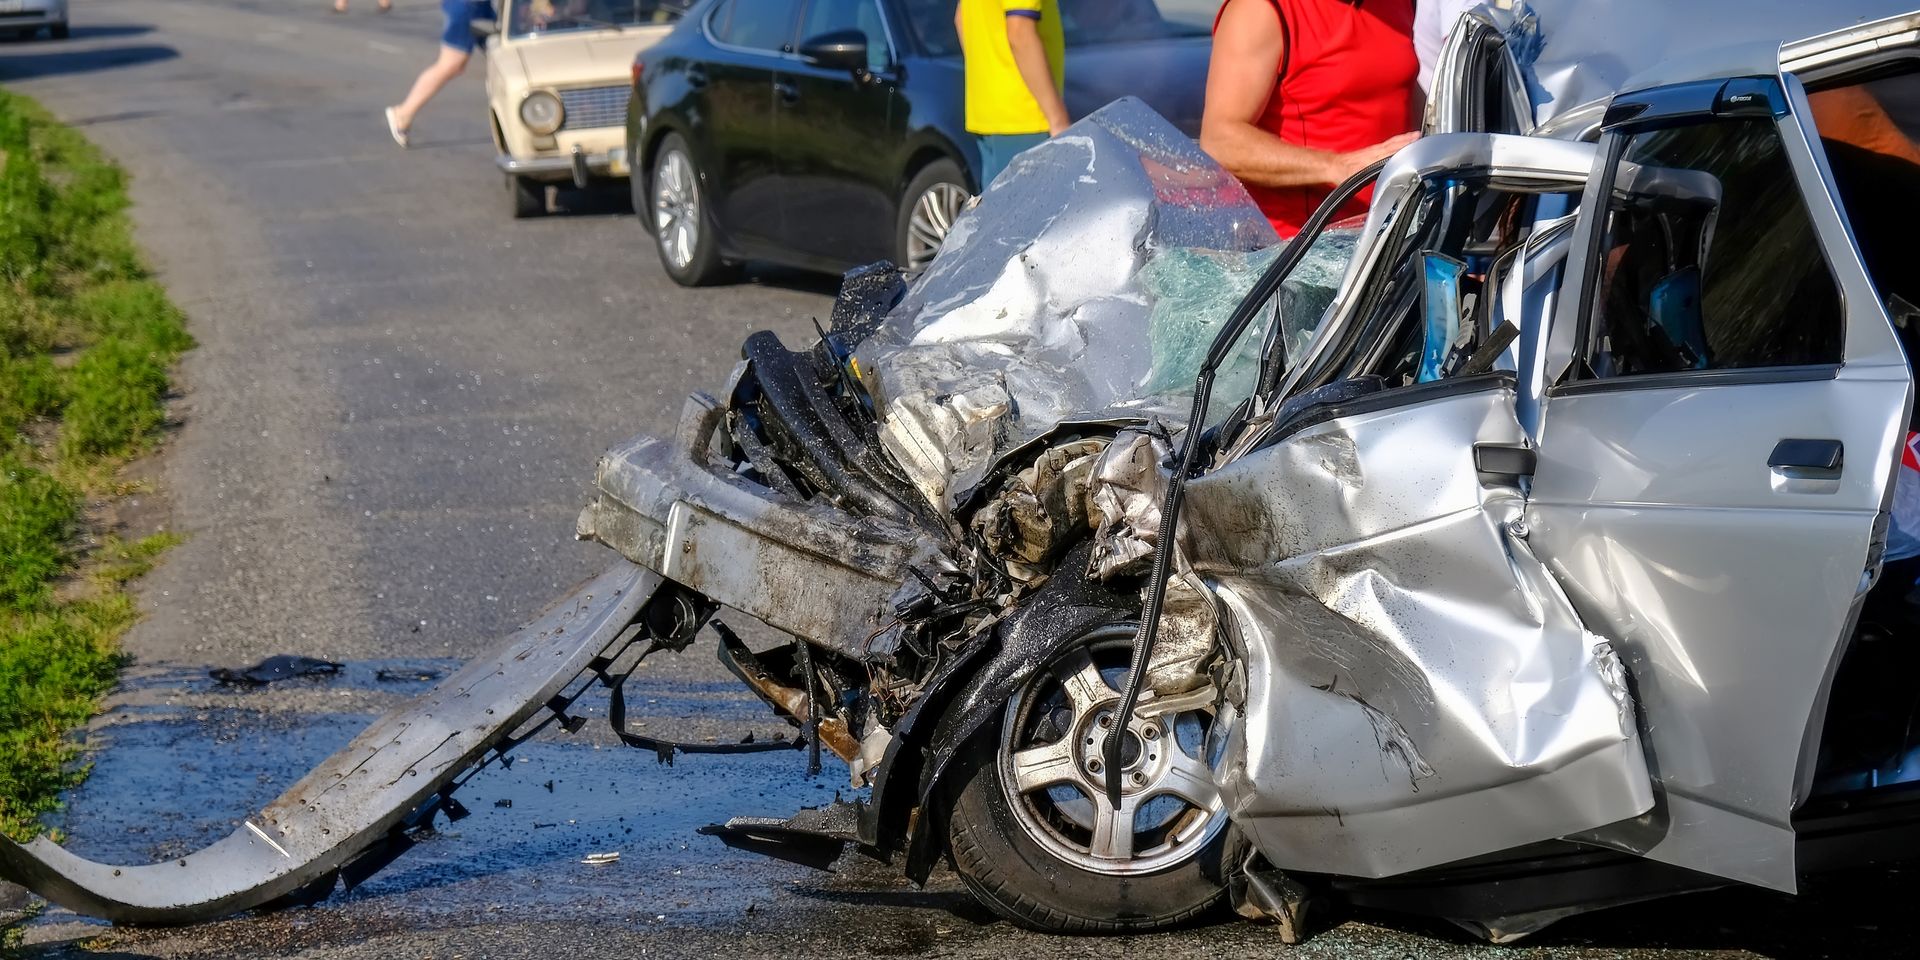 North Carolina Drunk Driving Accidents Are More Common Than You Think…